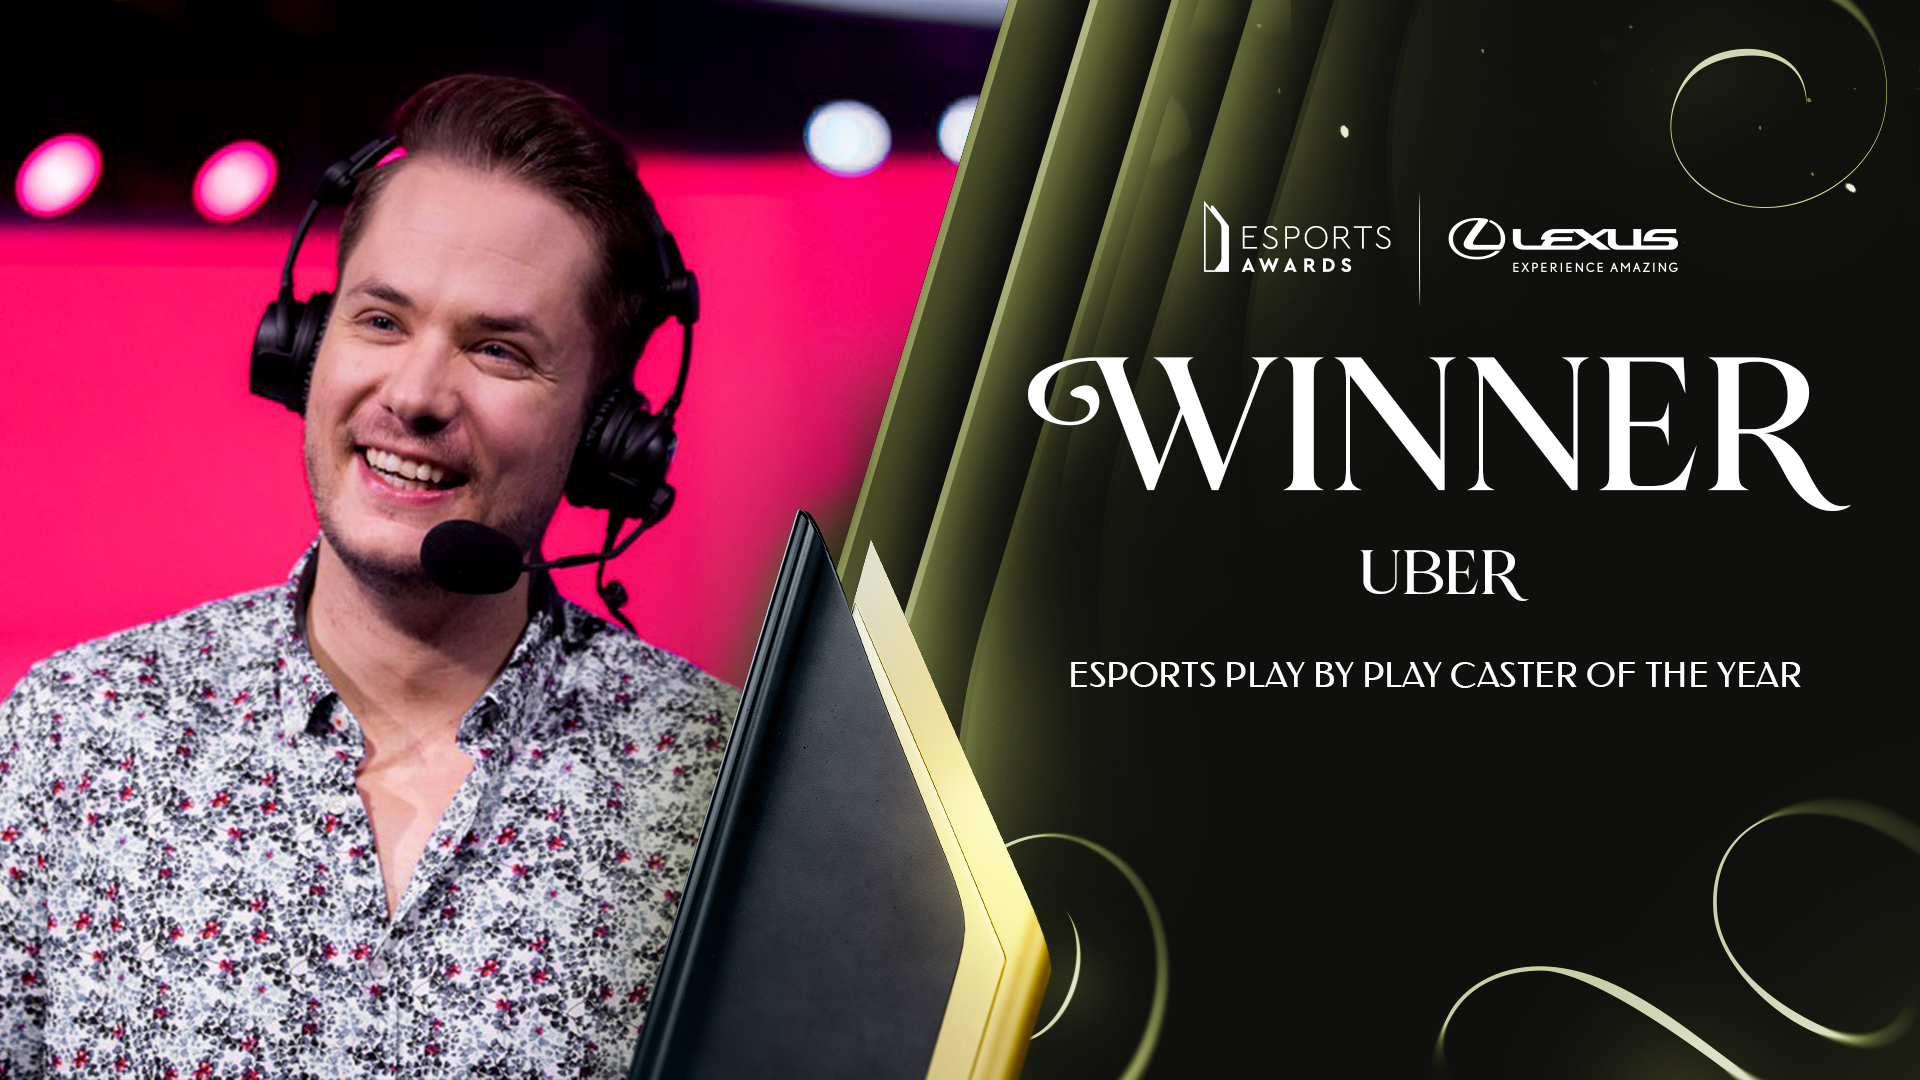 Esports Play by Play Caster of the Year: Mitch “Uber” Leslie